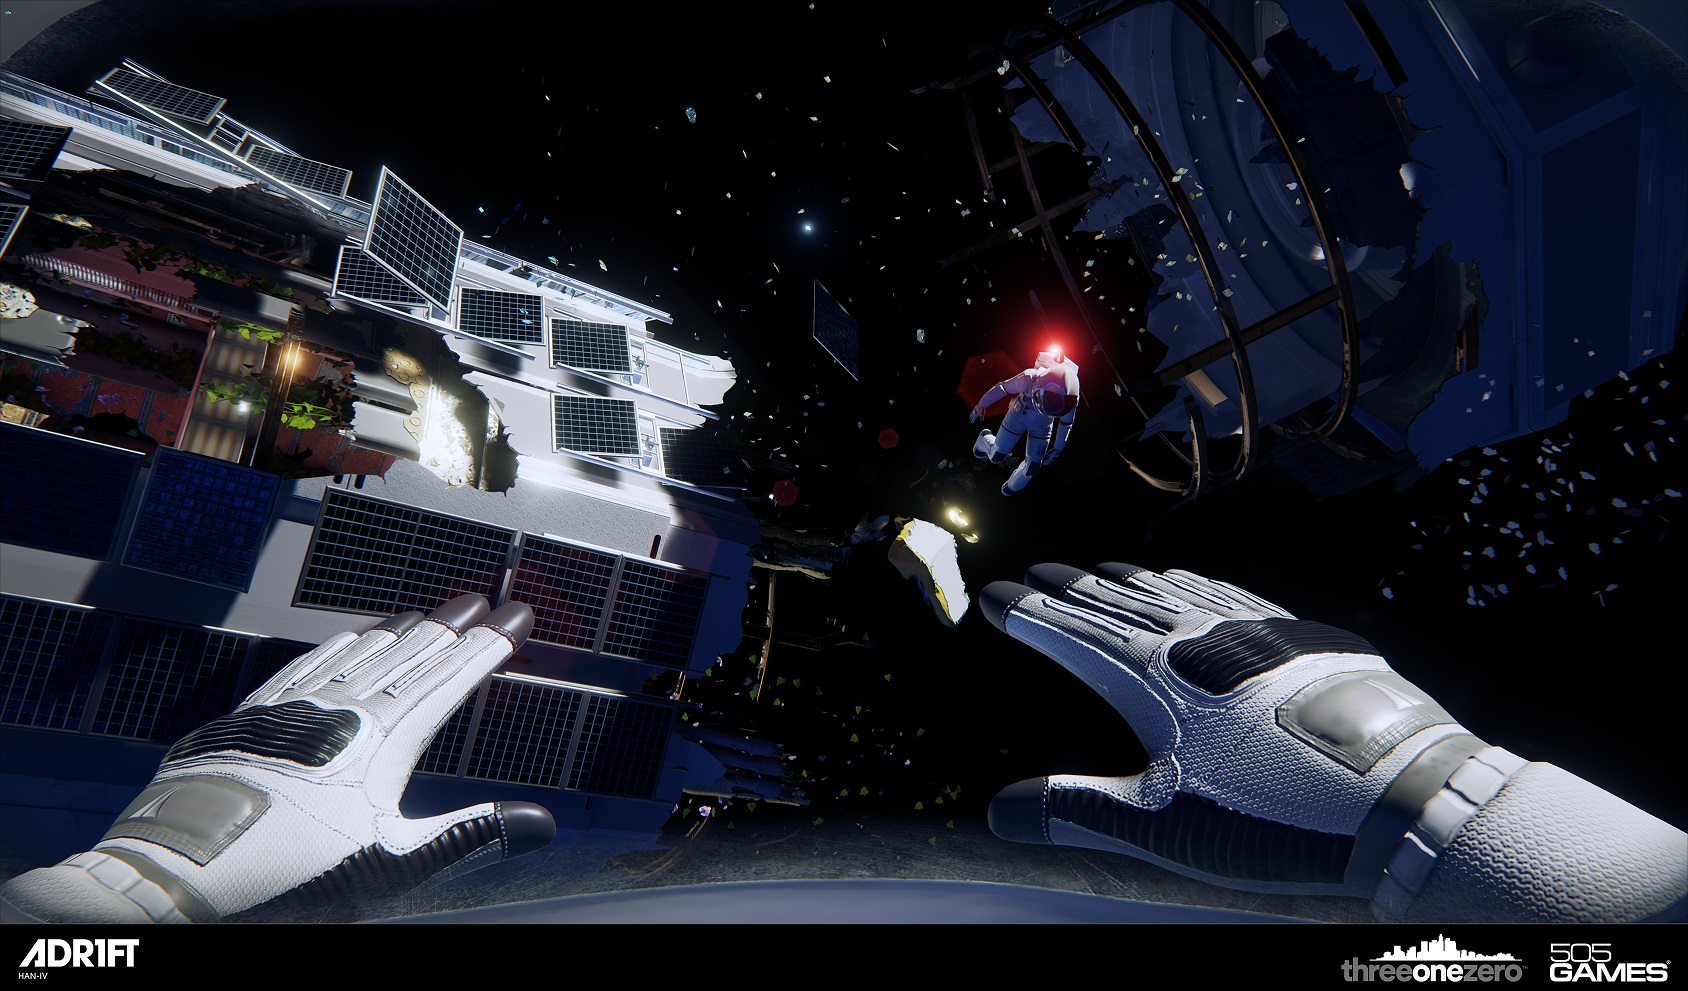 Adr1ft – First Look